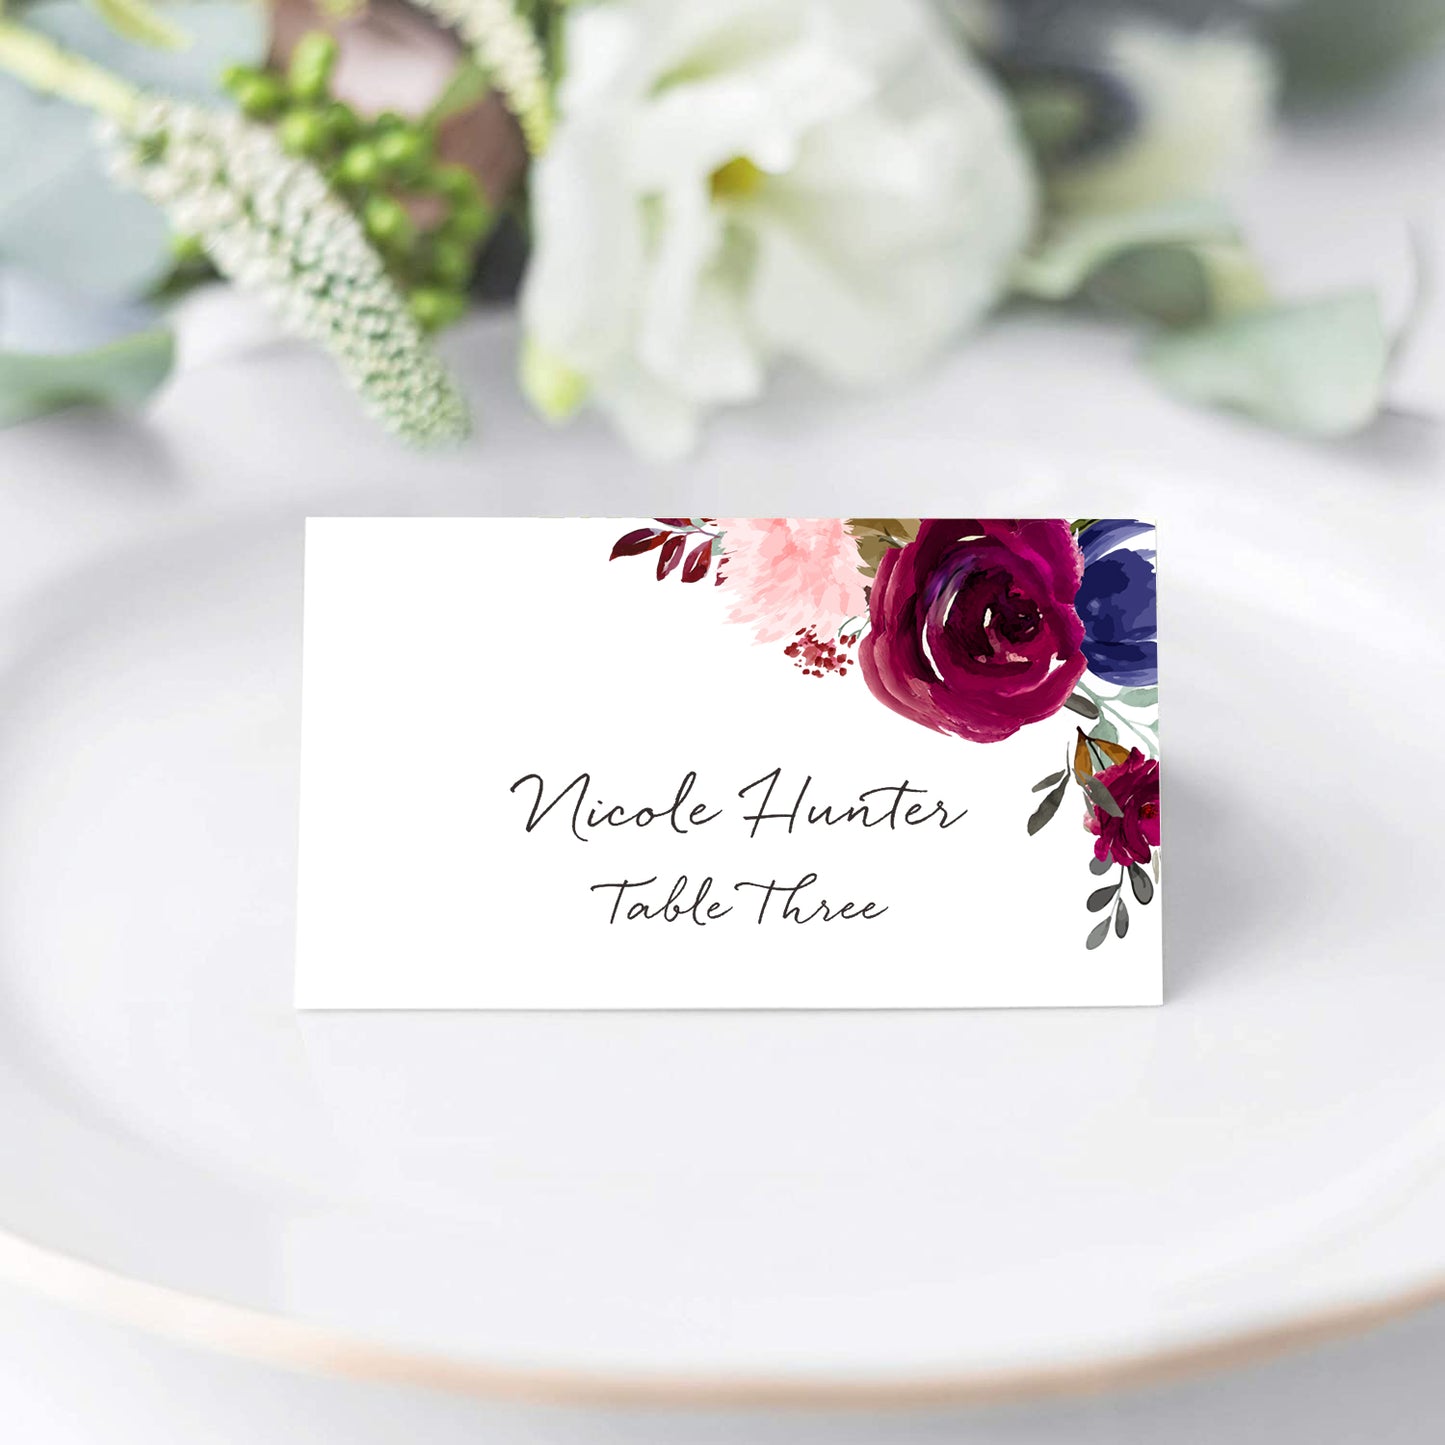 Floral Place Cards for Wedding or Party, Seating Place Cards for Tables, Scored for Easy Folding, Flower Design, 2 x 3.5 Inches